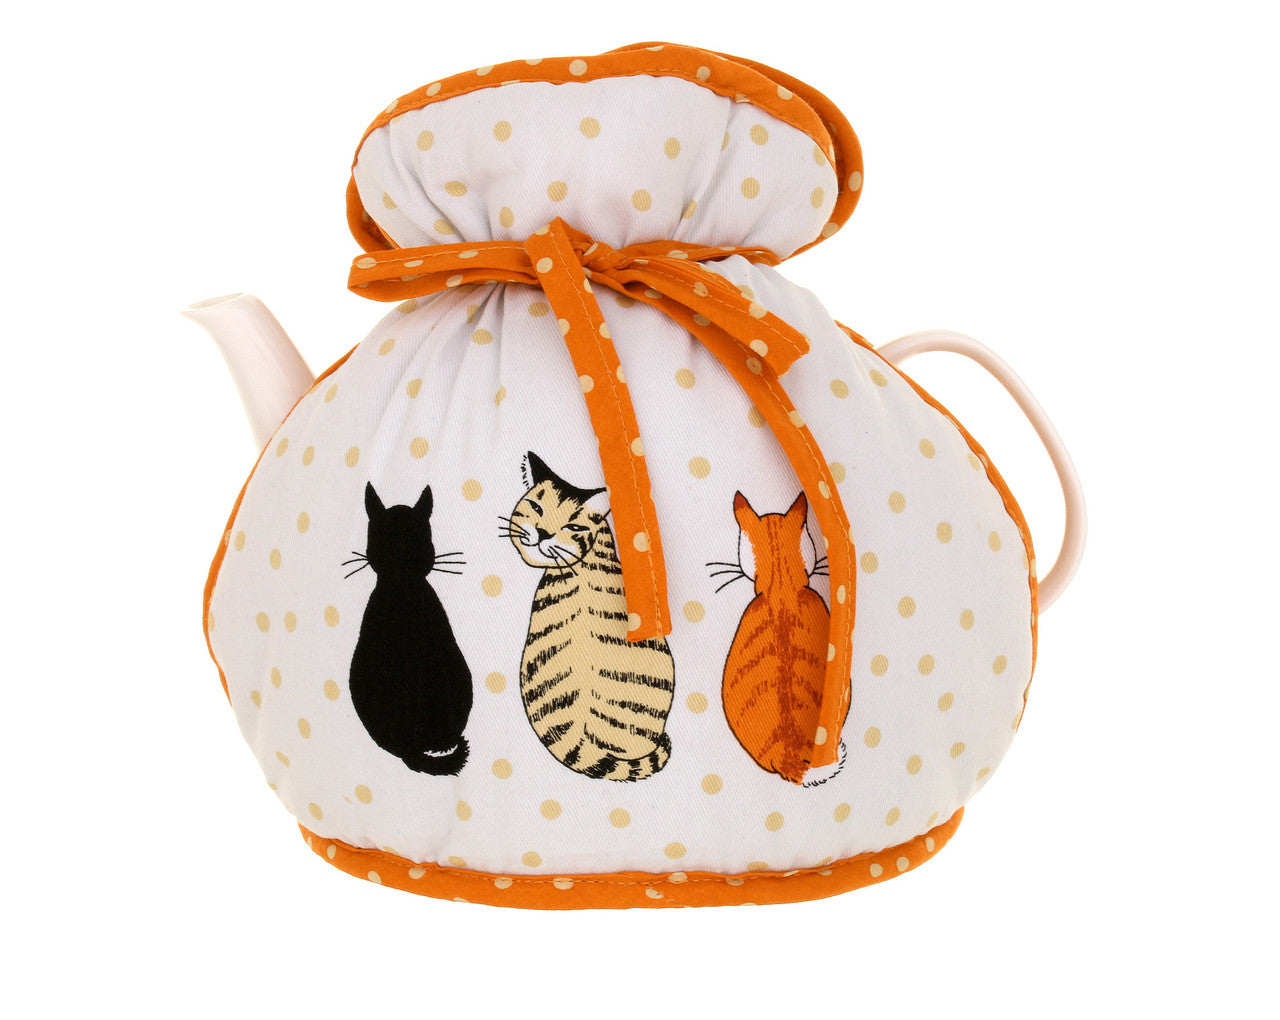 Cats in Waiting Muff Tea Cosy from Ulster Weavers